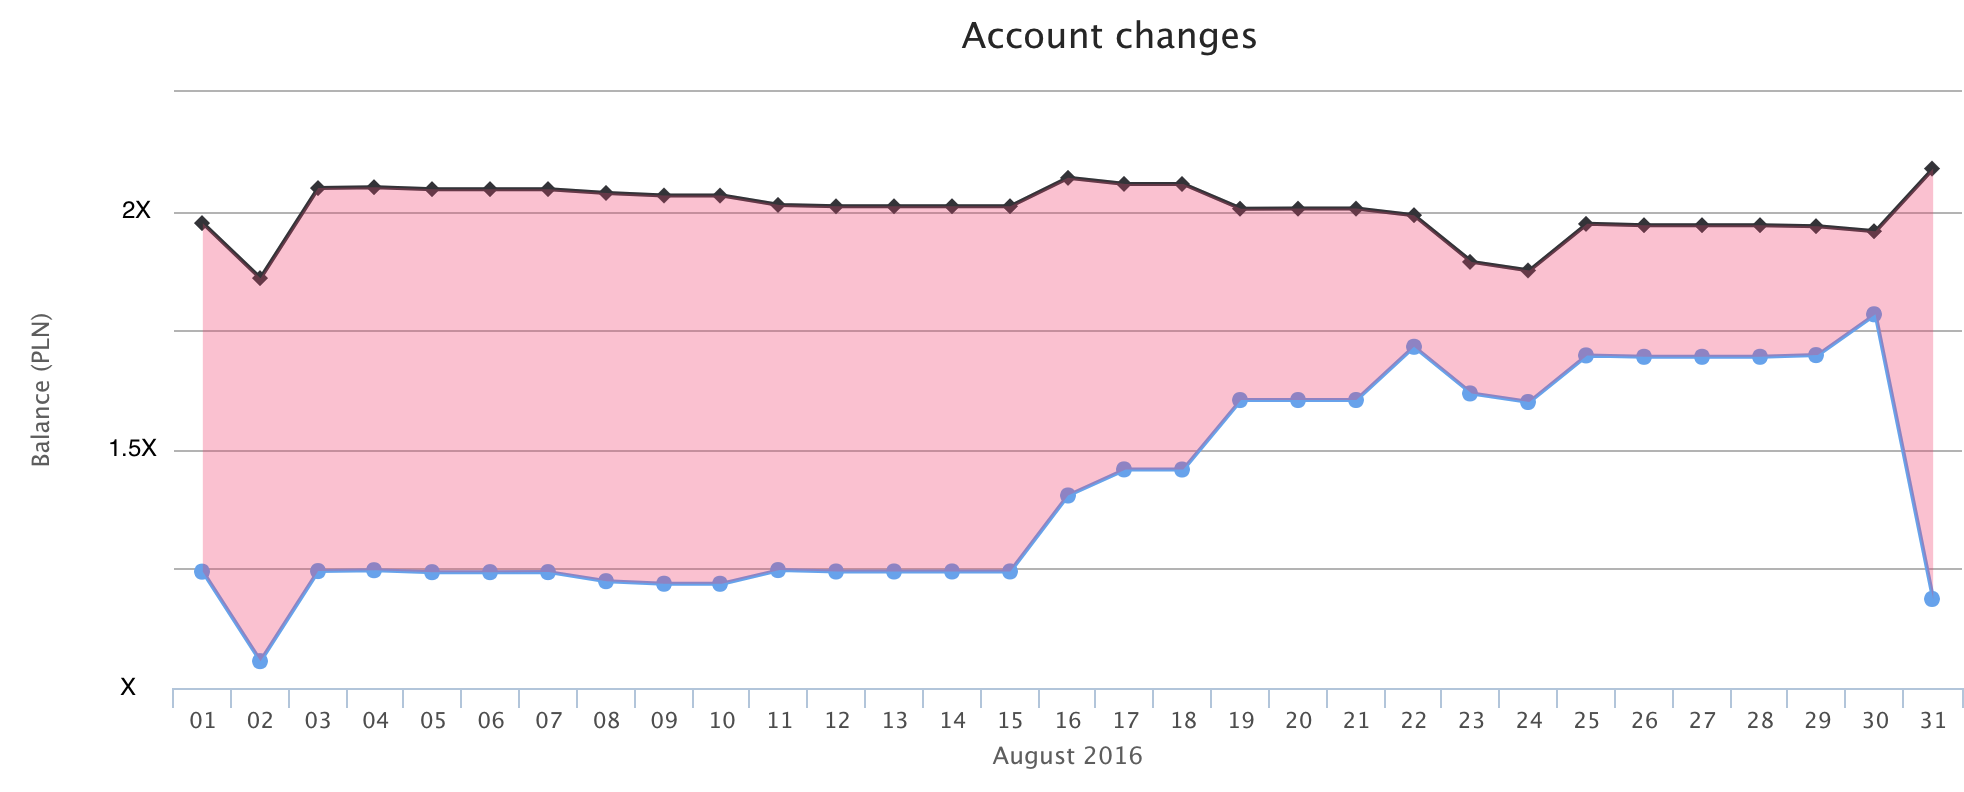 Account state and expected payments in August 2016